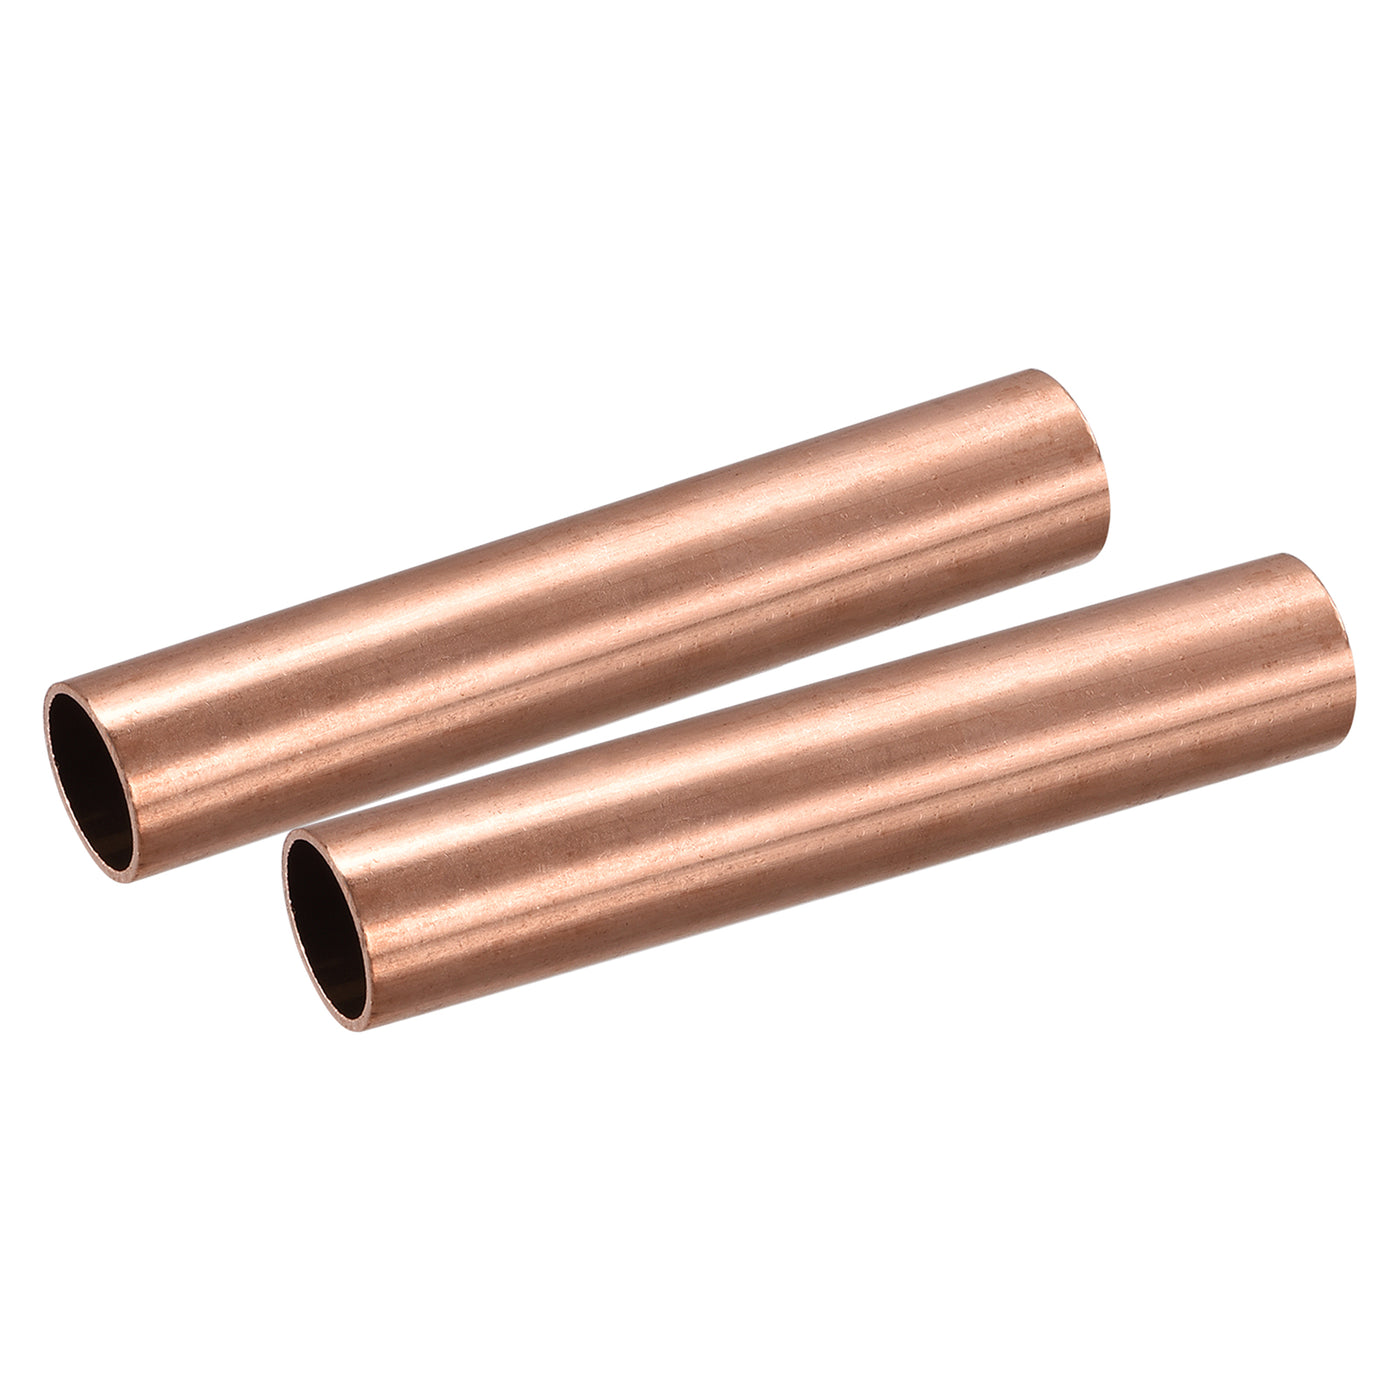 uxcell Uxcell Copper Round Tube 20mm OD 1.5mm Wall Thickness 100mm Length Pipe Tubing 2 Pcs